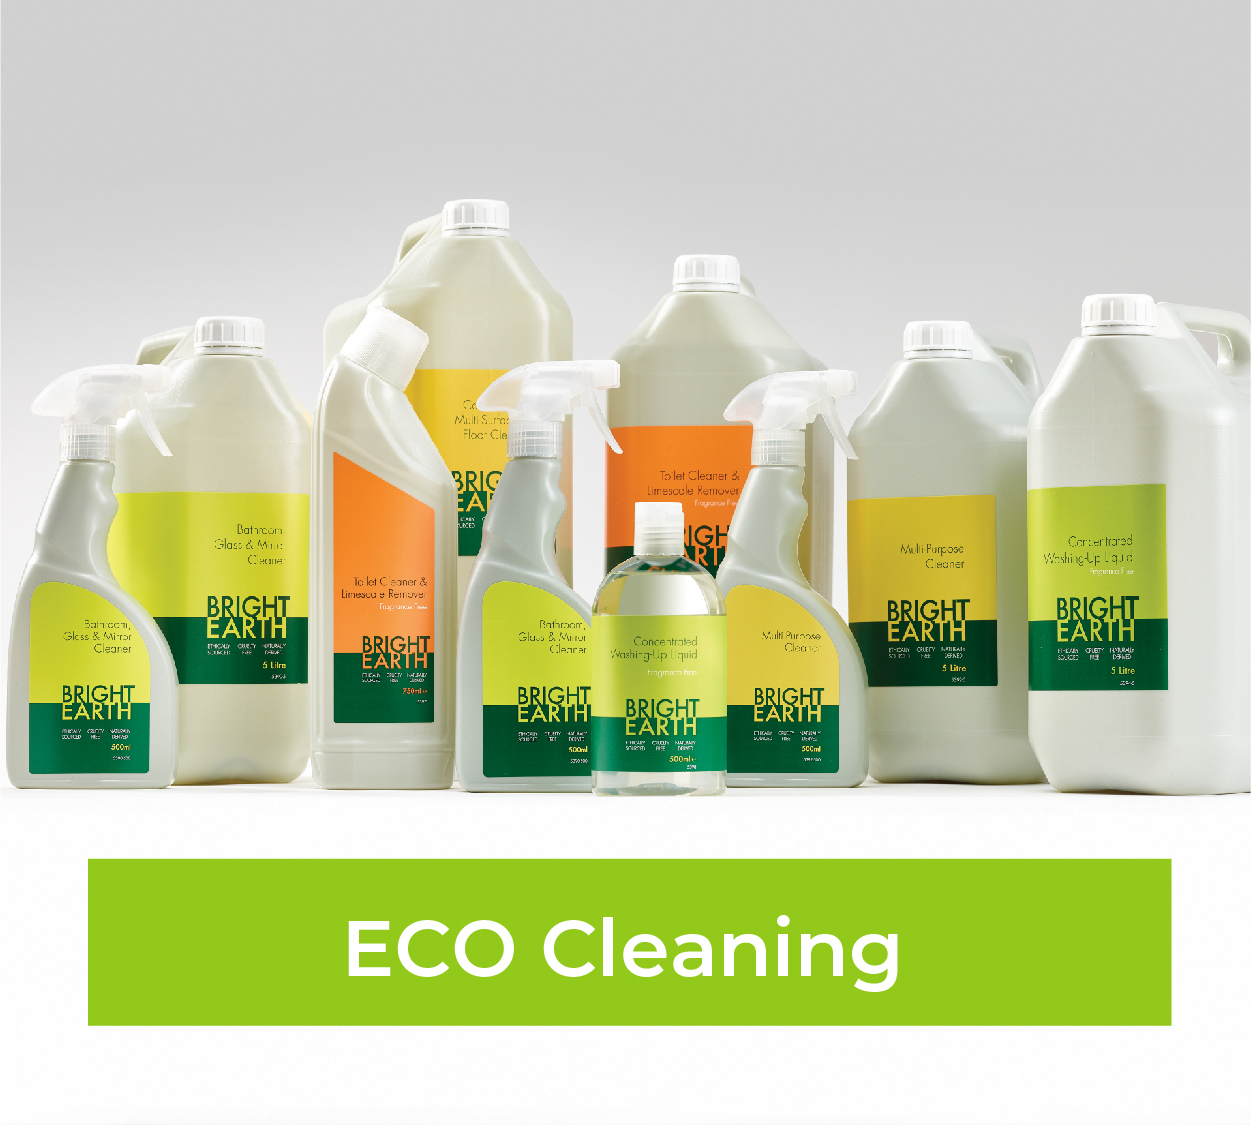 Bright Earth - Eco Friendly Cleaning